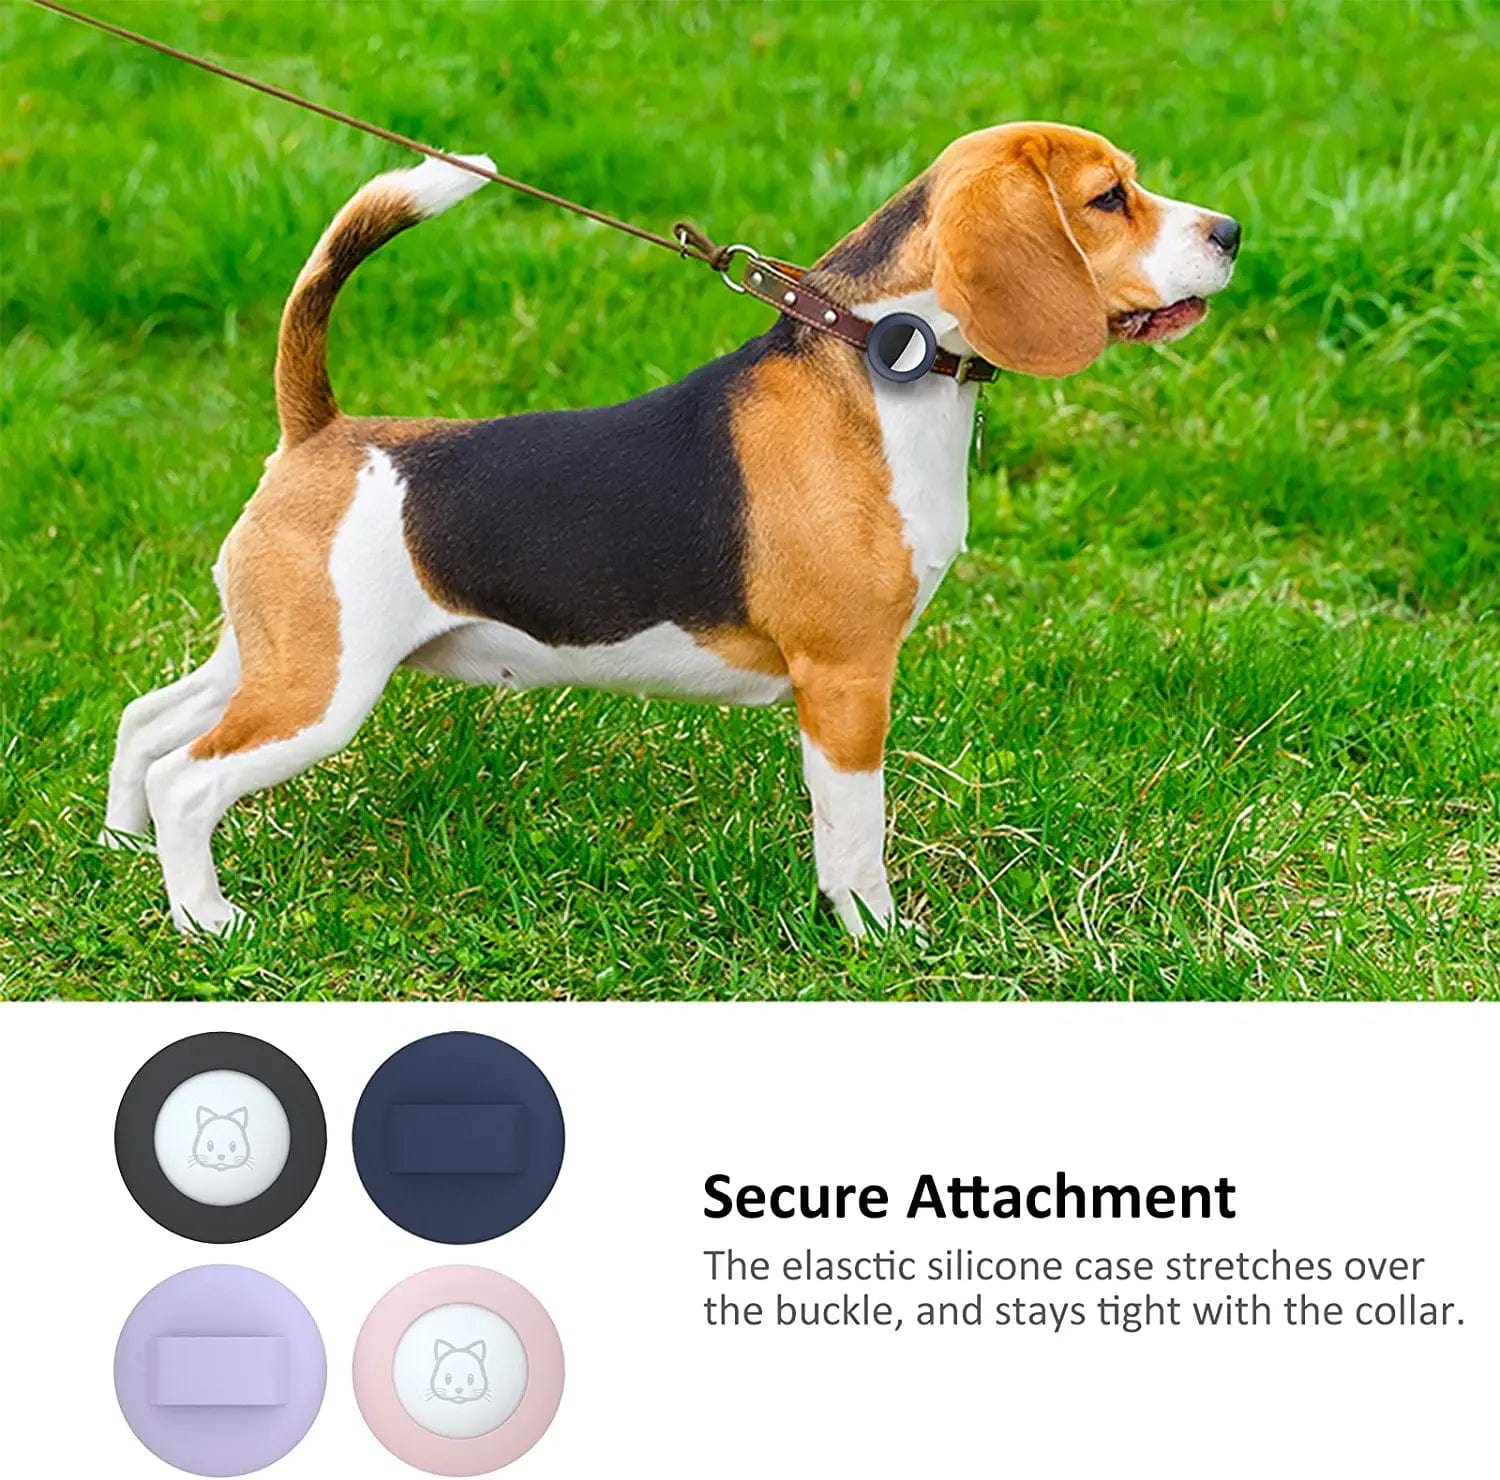 2022 Airtag Cat Collar Holder, Small Air Tag Cat Collar Holder Compatible with Apple Airtag GPS Tracker, 2Pack Waterproof Case Cover for Cat Dog Pet Collar within 3/8 Inch